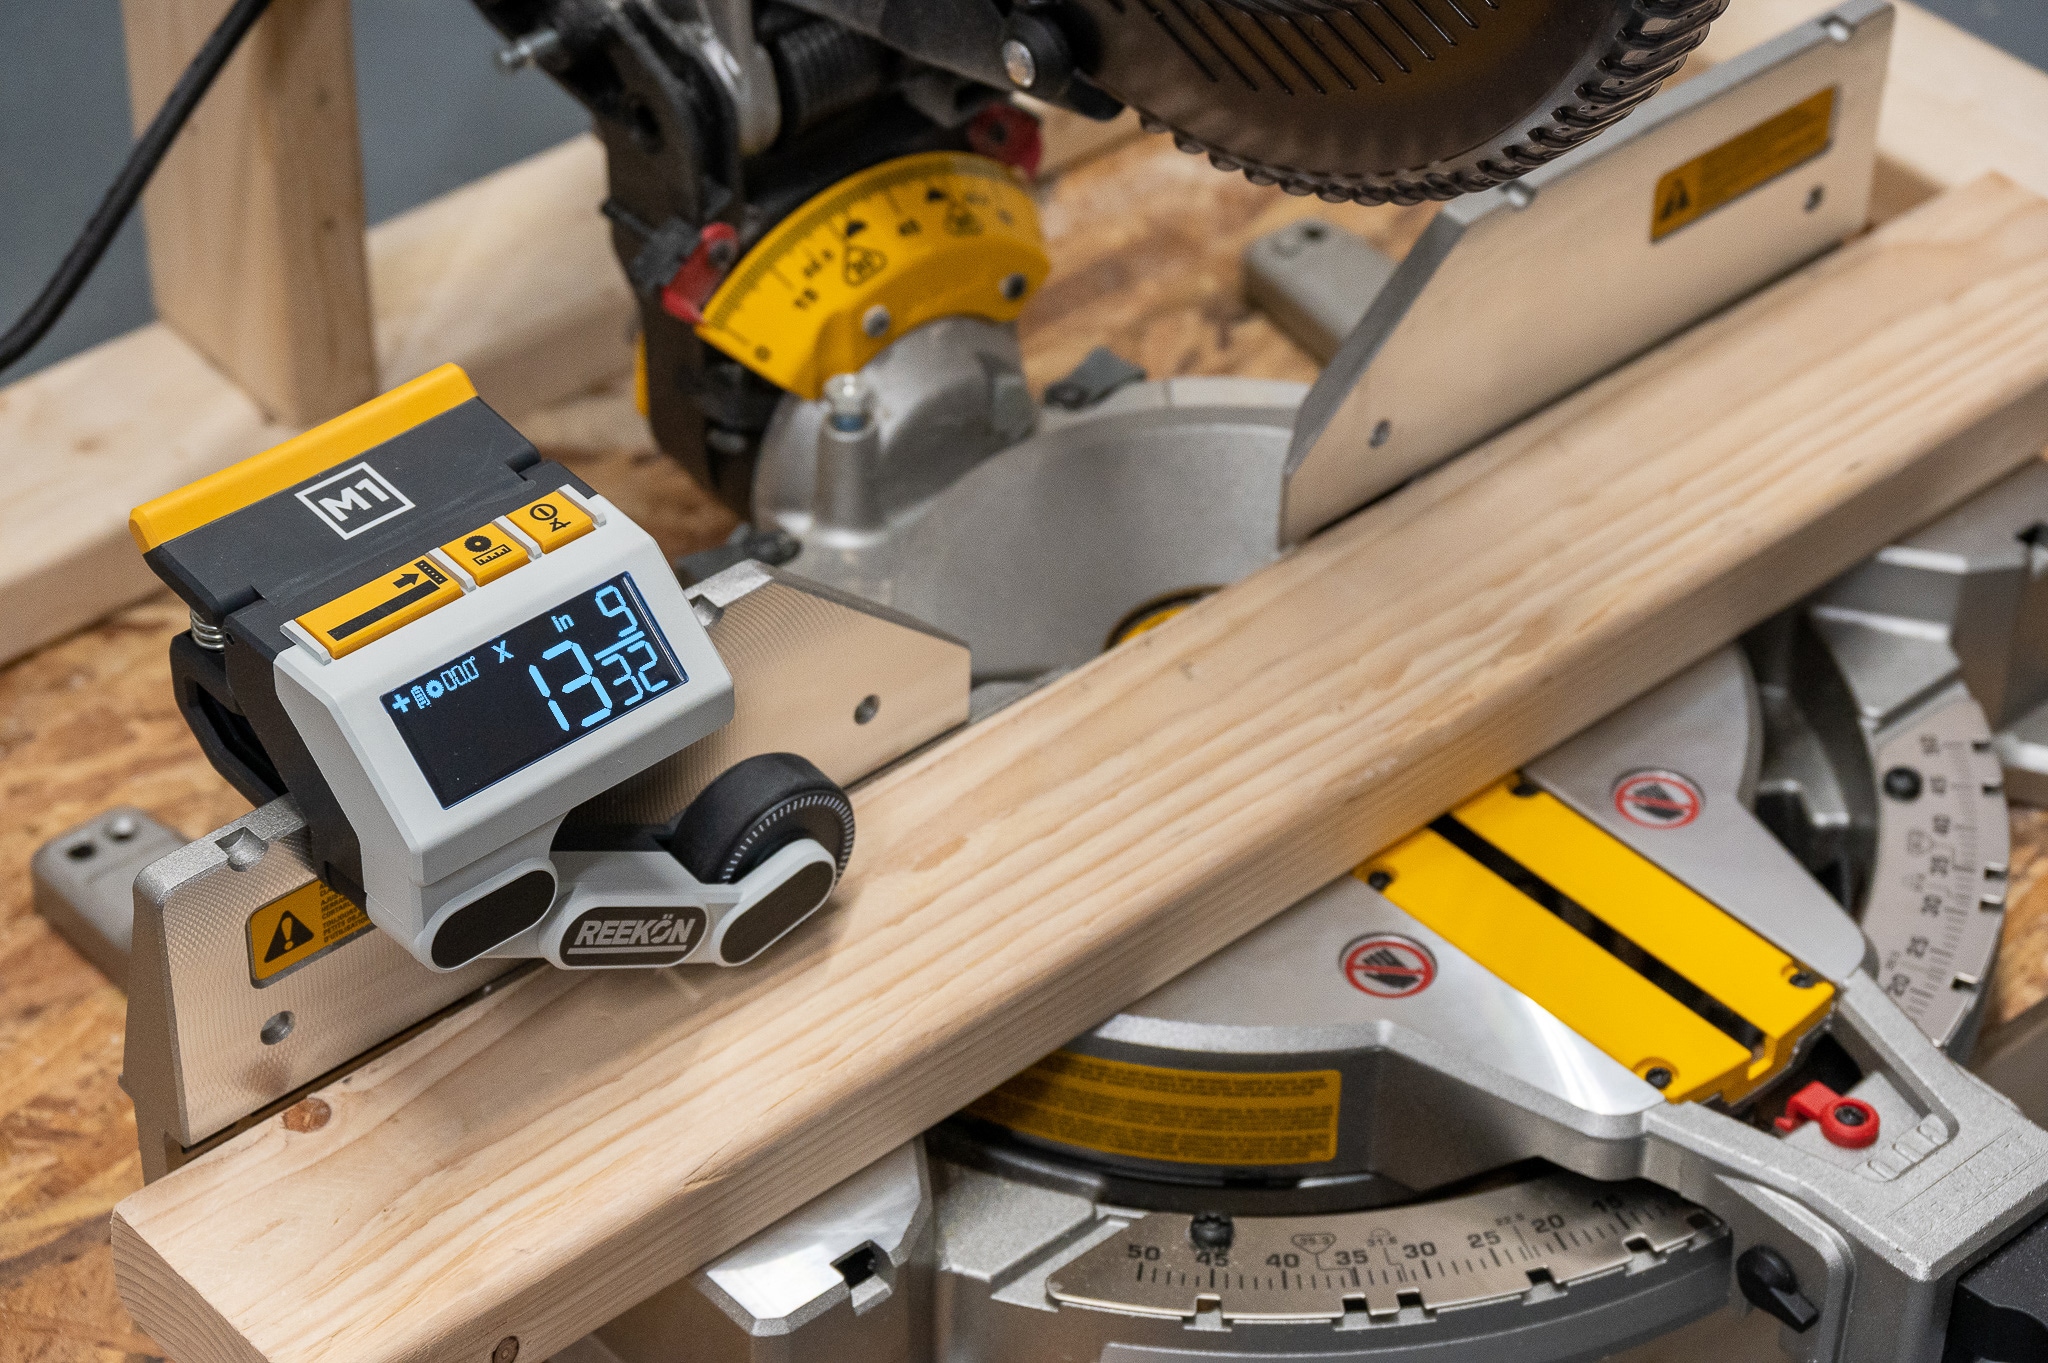 REEKON M1 Caliber Measuring Tool for Miter Saws – Eliminates Need to  Measure & Mark Materials, Reduces Cut Time and Increases Safety, Measures  Flat 